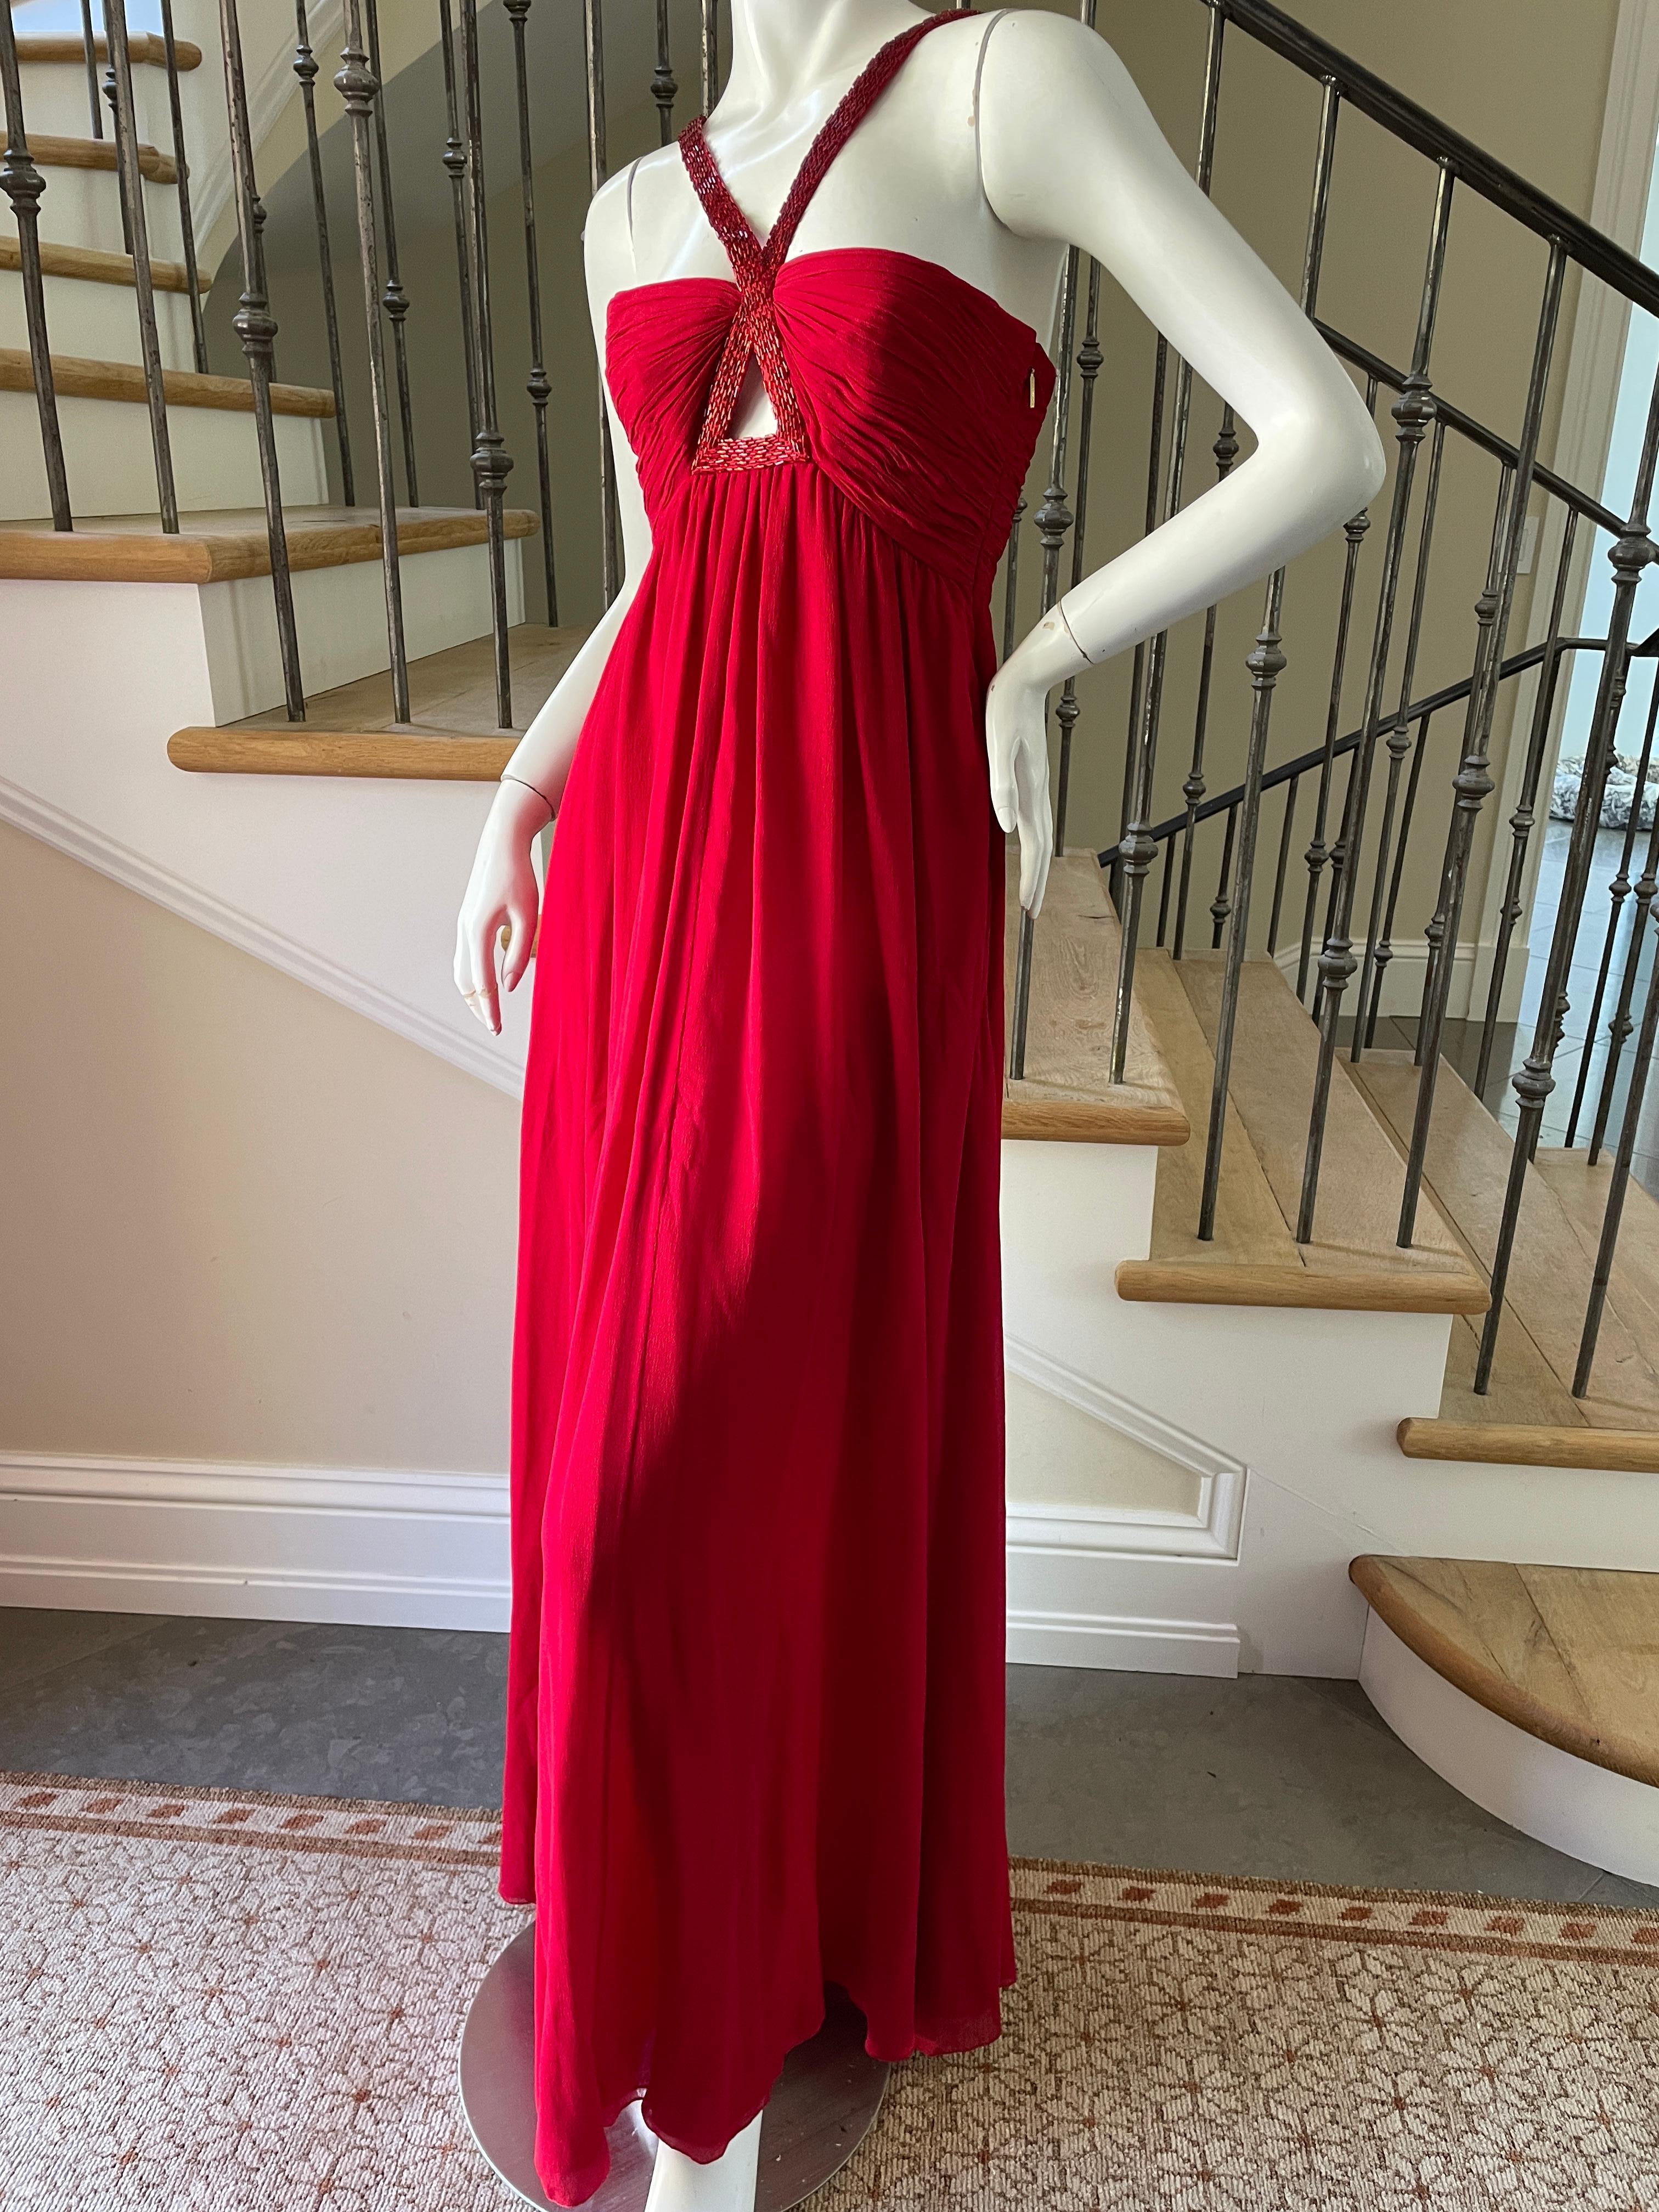 Roberto Cavalli Vintage Coral Red Silk Evening Dress with Keyhole Beaded Details In Excellent Condition For Sale In Cloverdale, CA